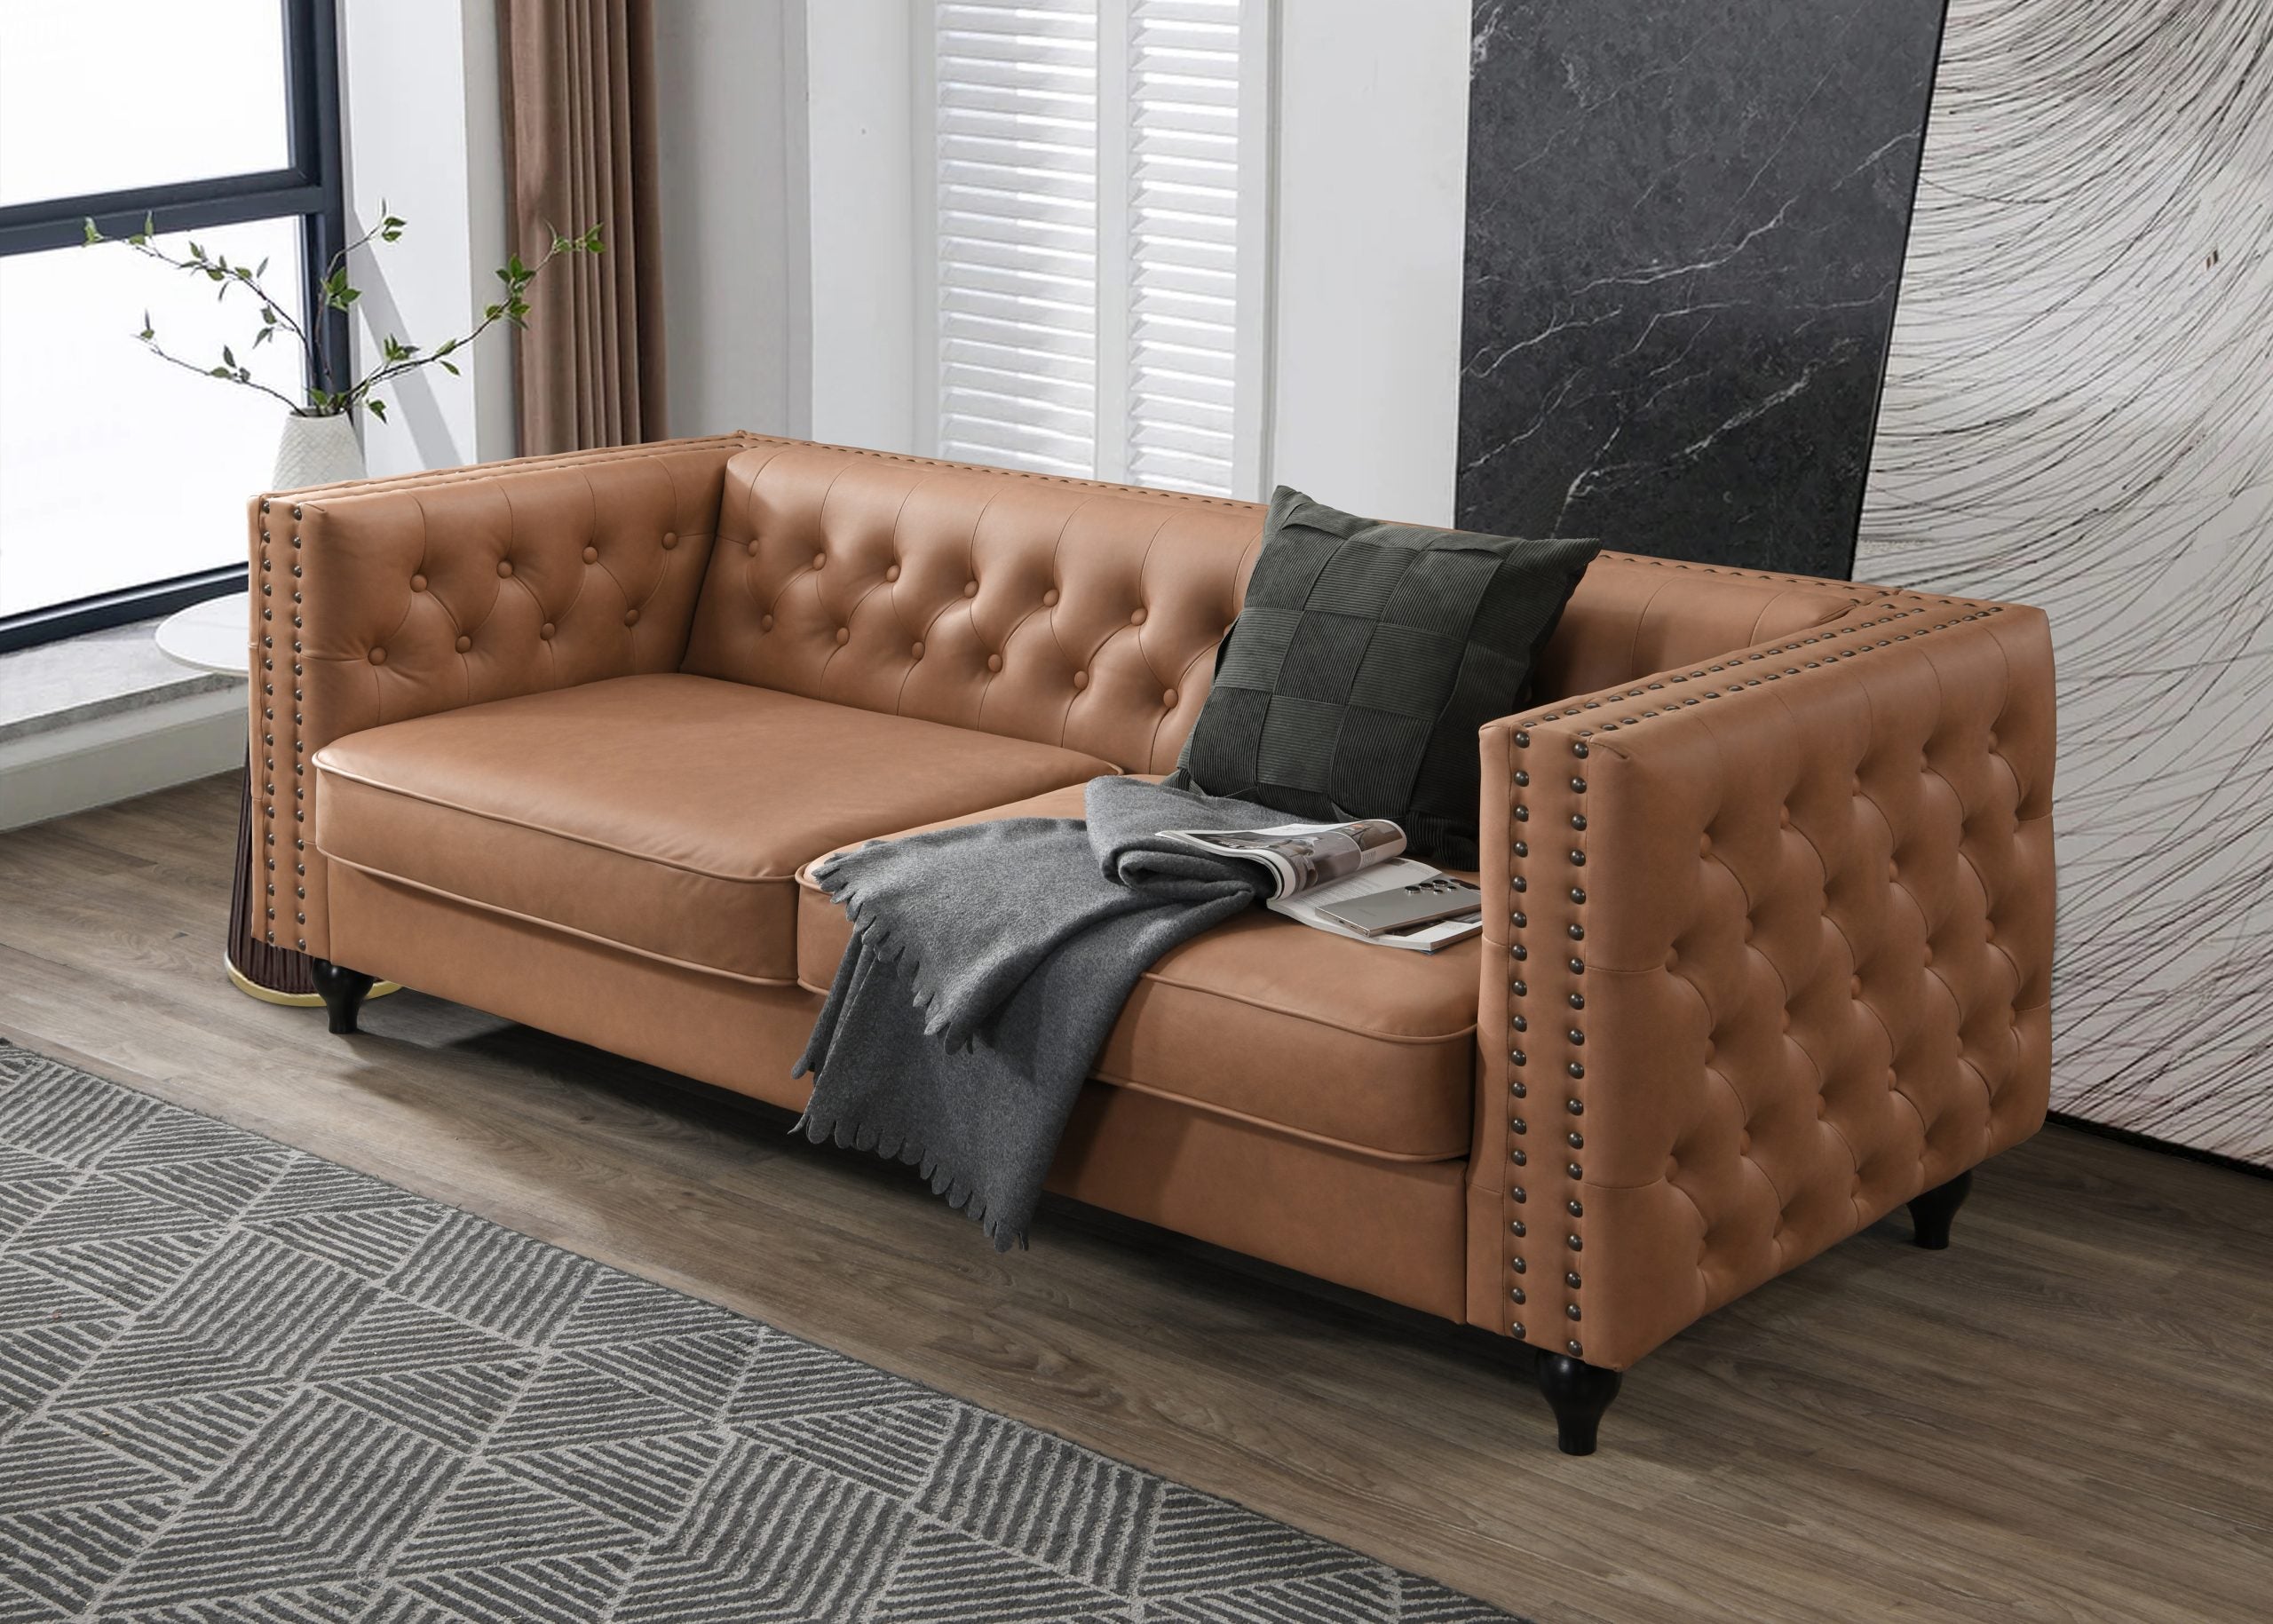 BT Mayfair PU Leather Upholstered  3 Seater Sofa